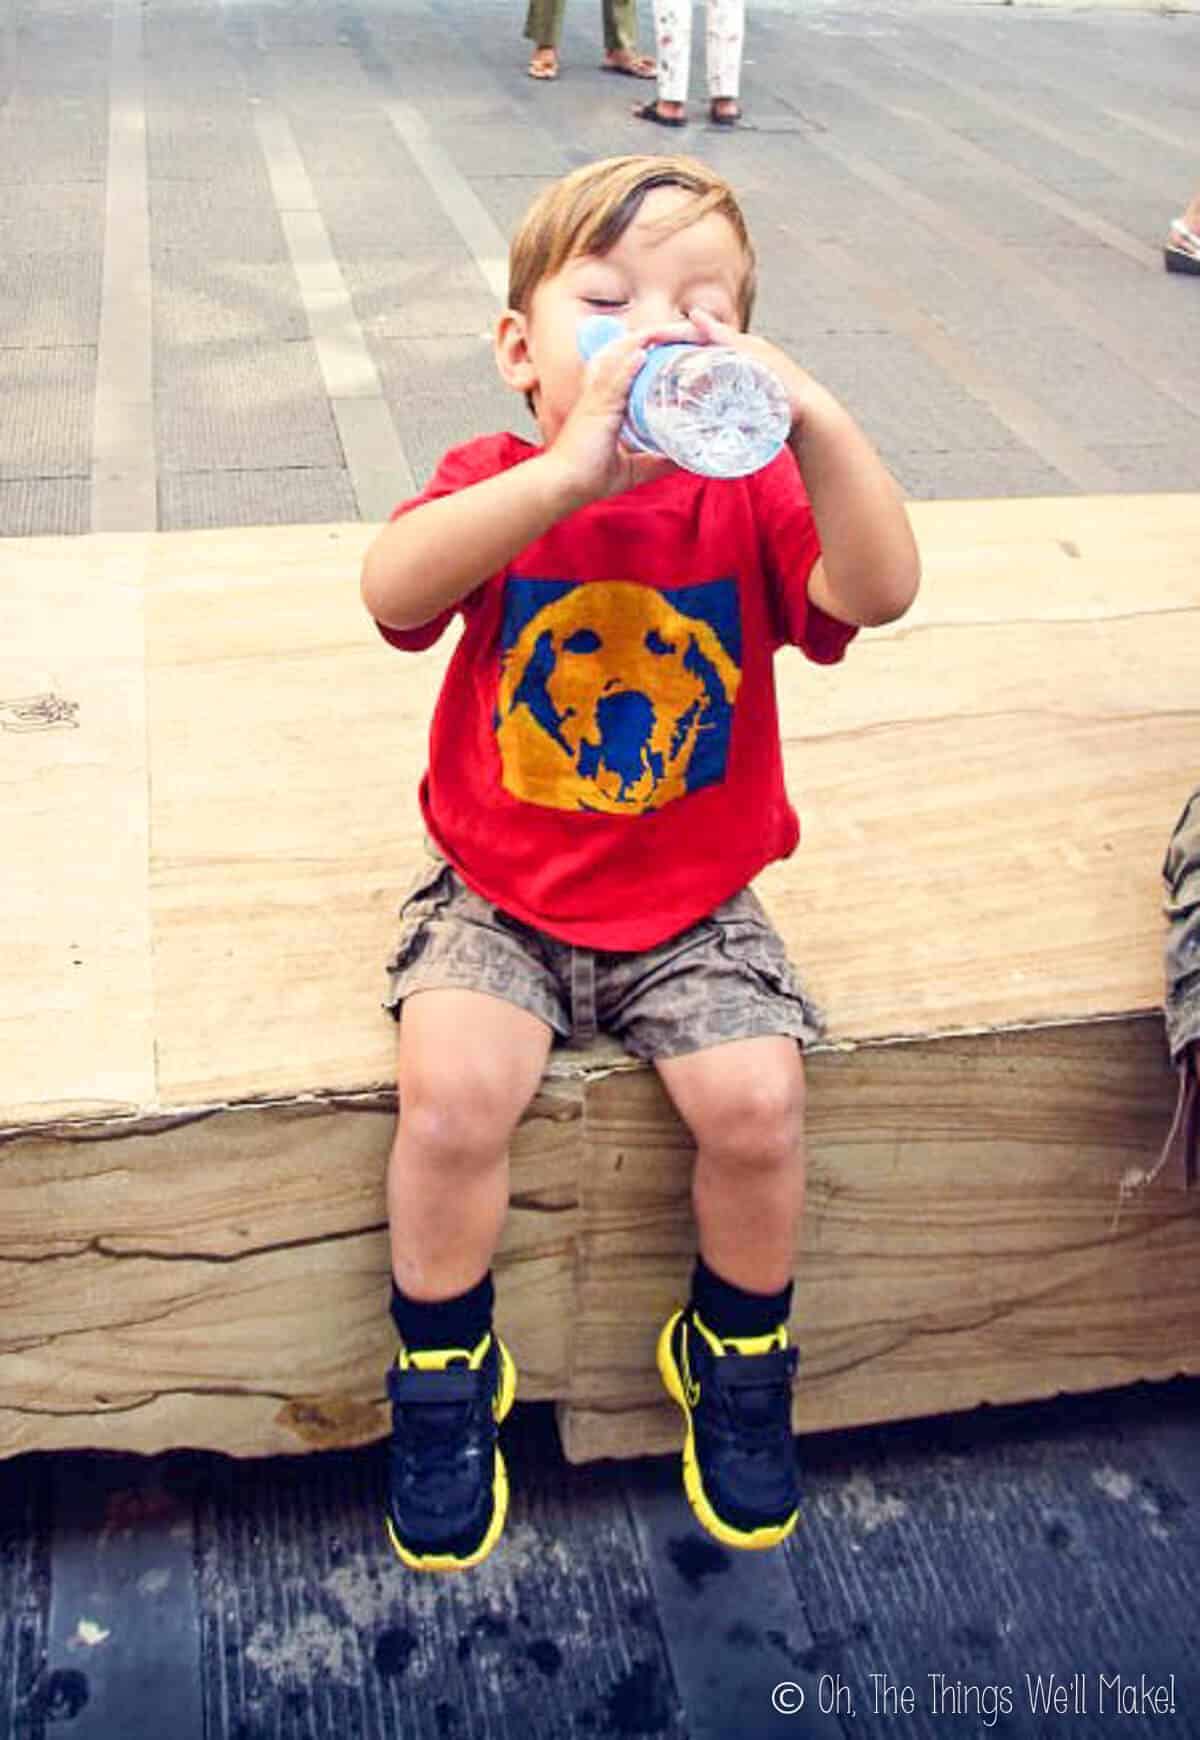 A young boy wearing a red handmade t-shirt with an orange and dark blue pop art dog face design in front.